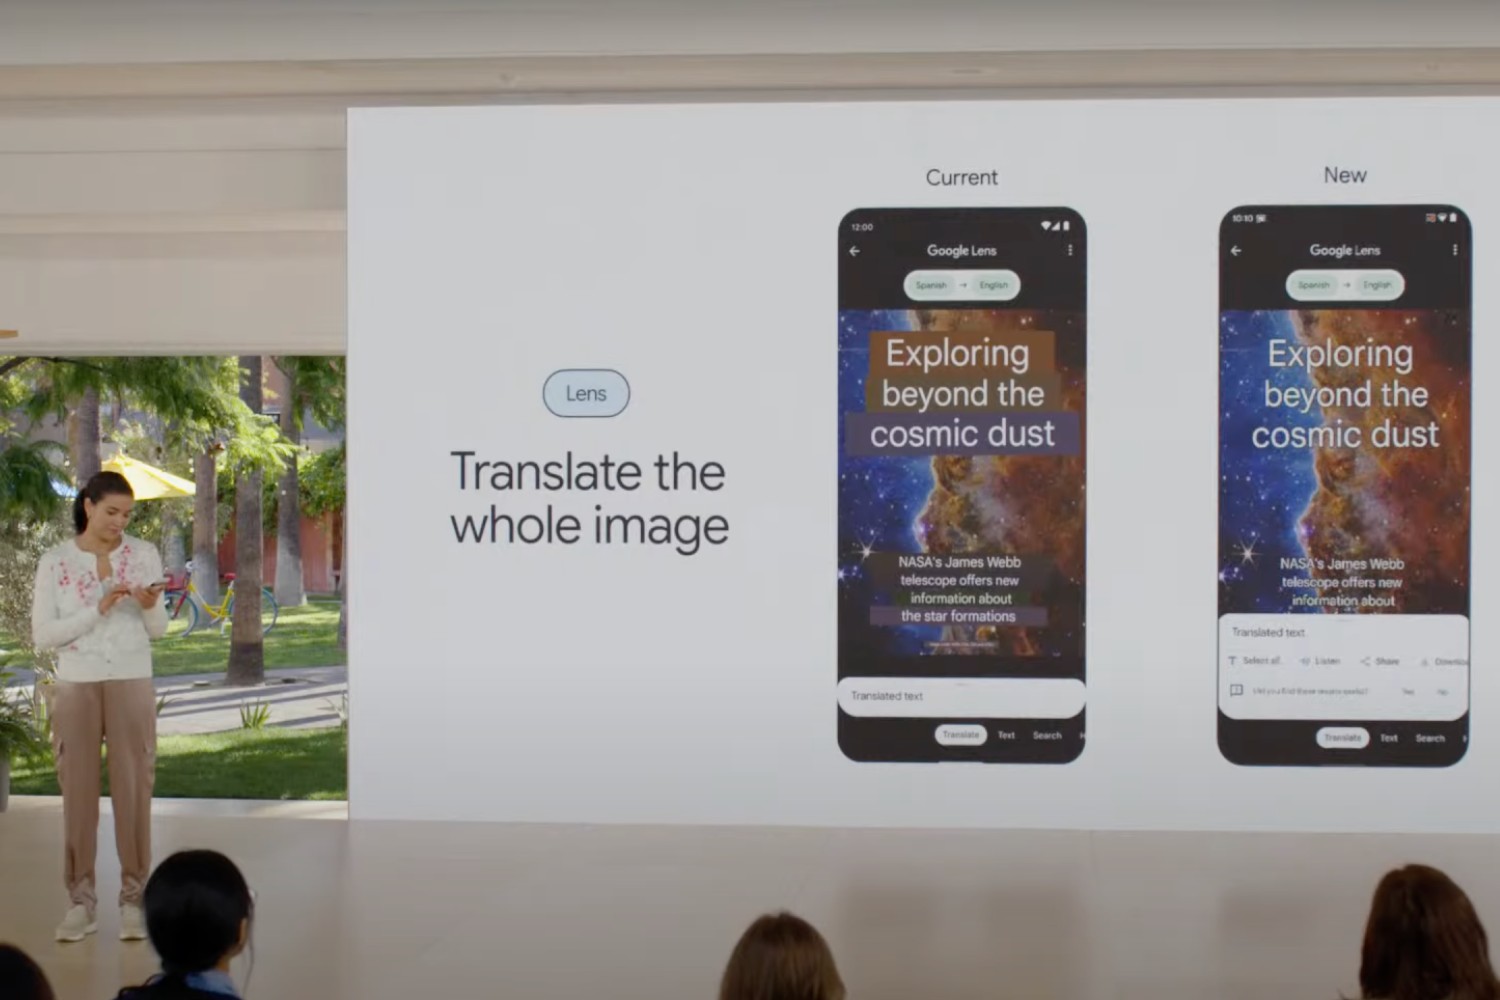 This new Google Lens feature looks like it’s straight out of
a sci-fi movie